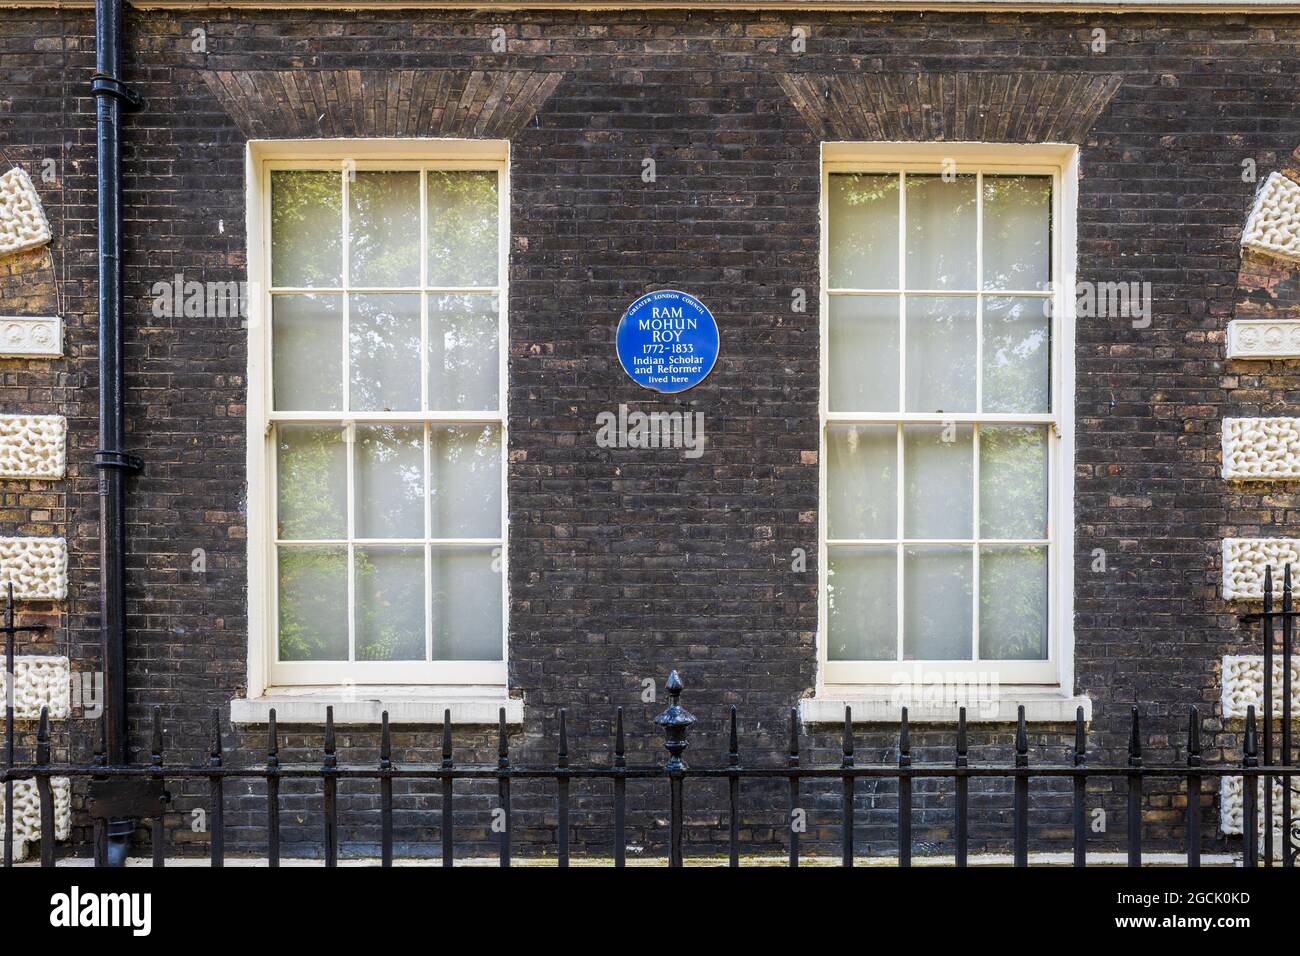 Ram Mohun Roy Blue Plaque 49 Bedford Square, Bloomsbury, London. RAM MOHUN  ROY 1772-1833 Indian Scholar and Reformer lived here Stock Photo - Alamy